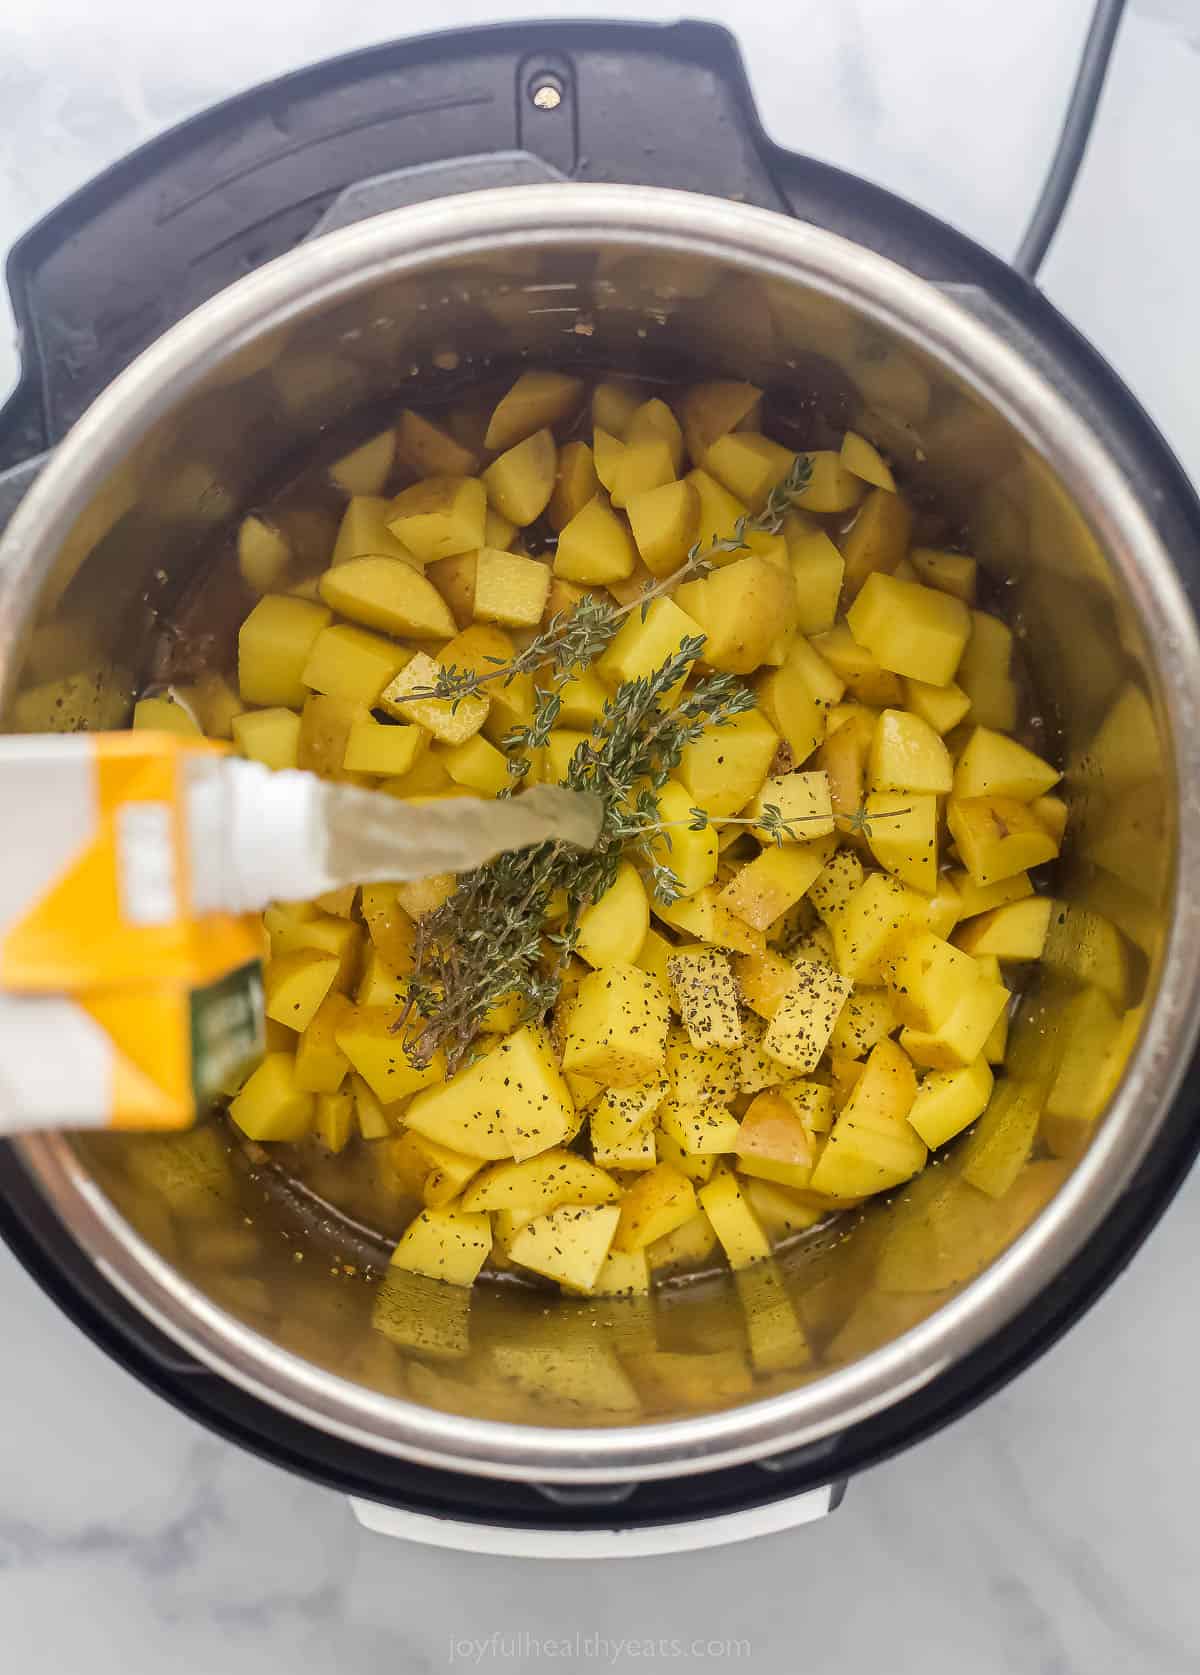 pouring stock into an Instant Pot that has potatoes and herbs in it